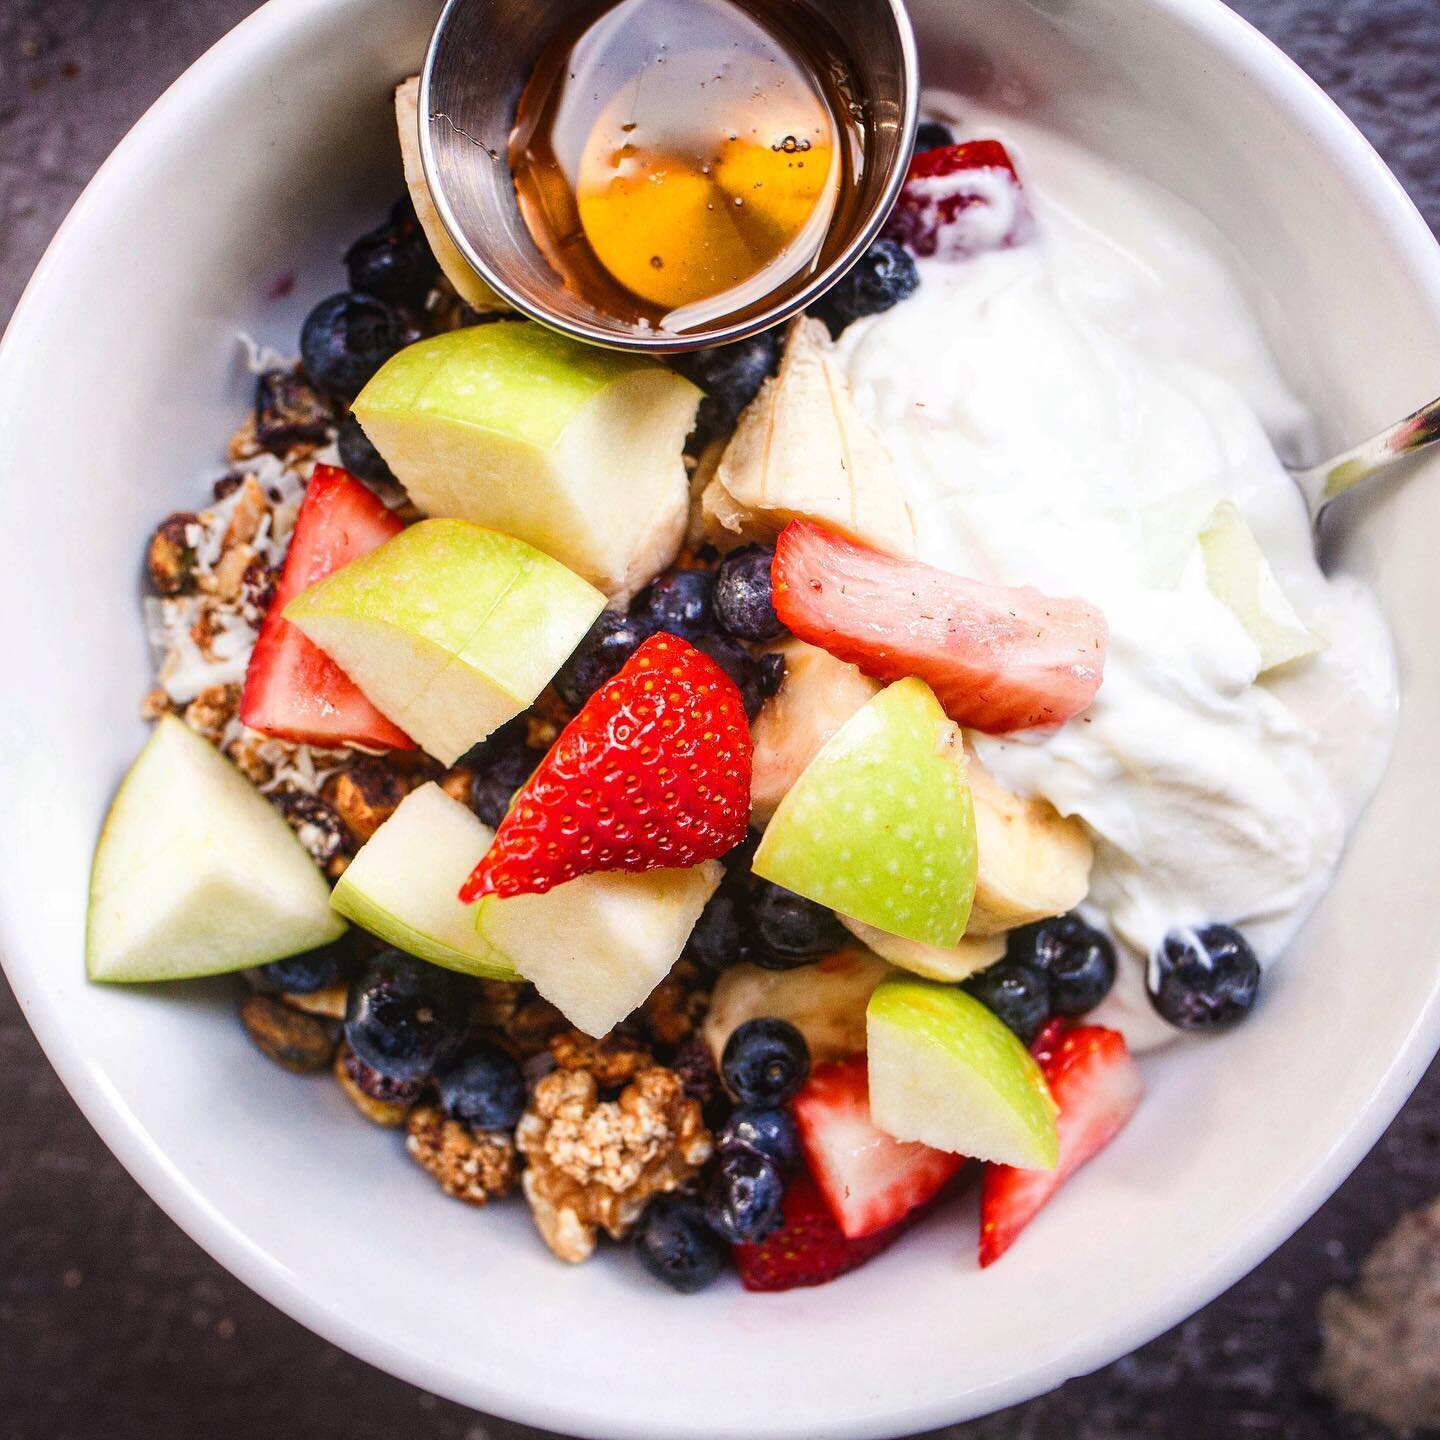 Keeping things light? We got you. Our Yogurt Bowl is topped with seasonal fruit and house-made granola to fill you up without weighing you down.